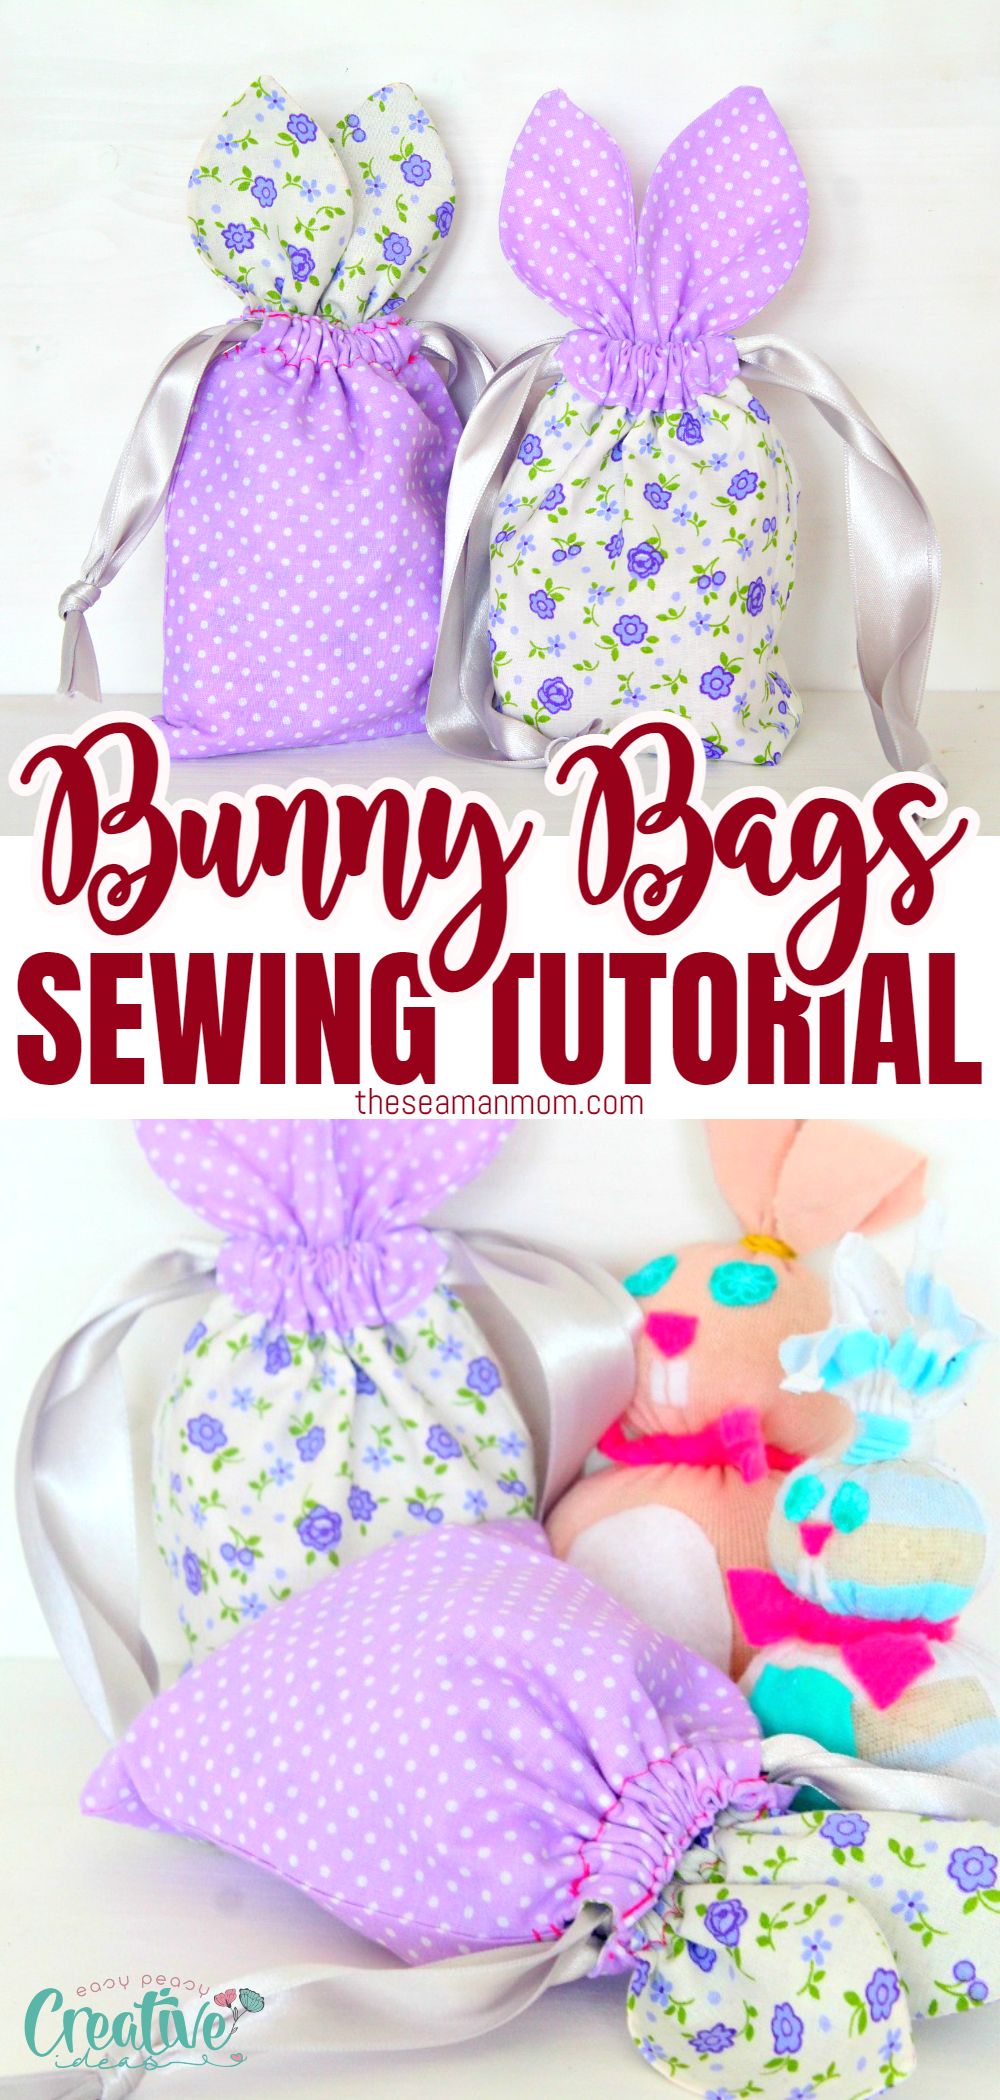 These little Easter treat bags are so irresistibly cute and perfect for hiding Easter treats! Make a whole bunch with this super easy bunny bag pattern! via @petroneagu